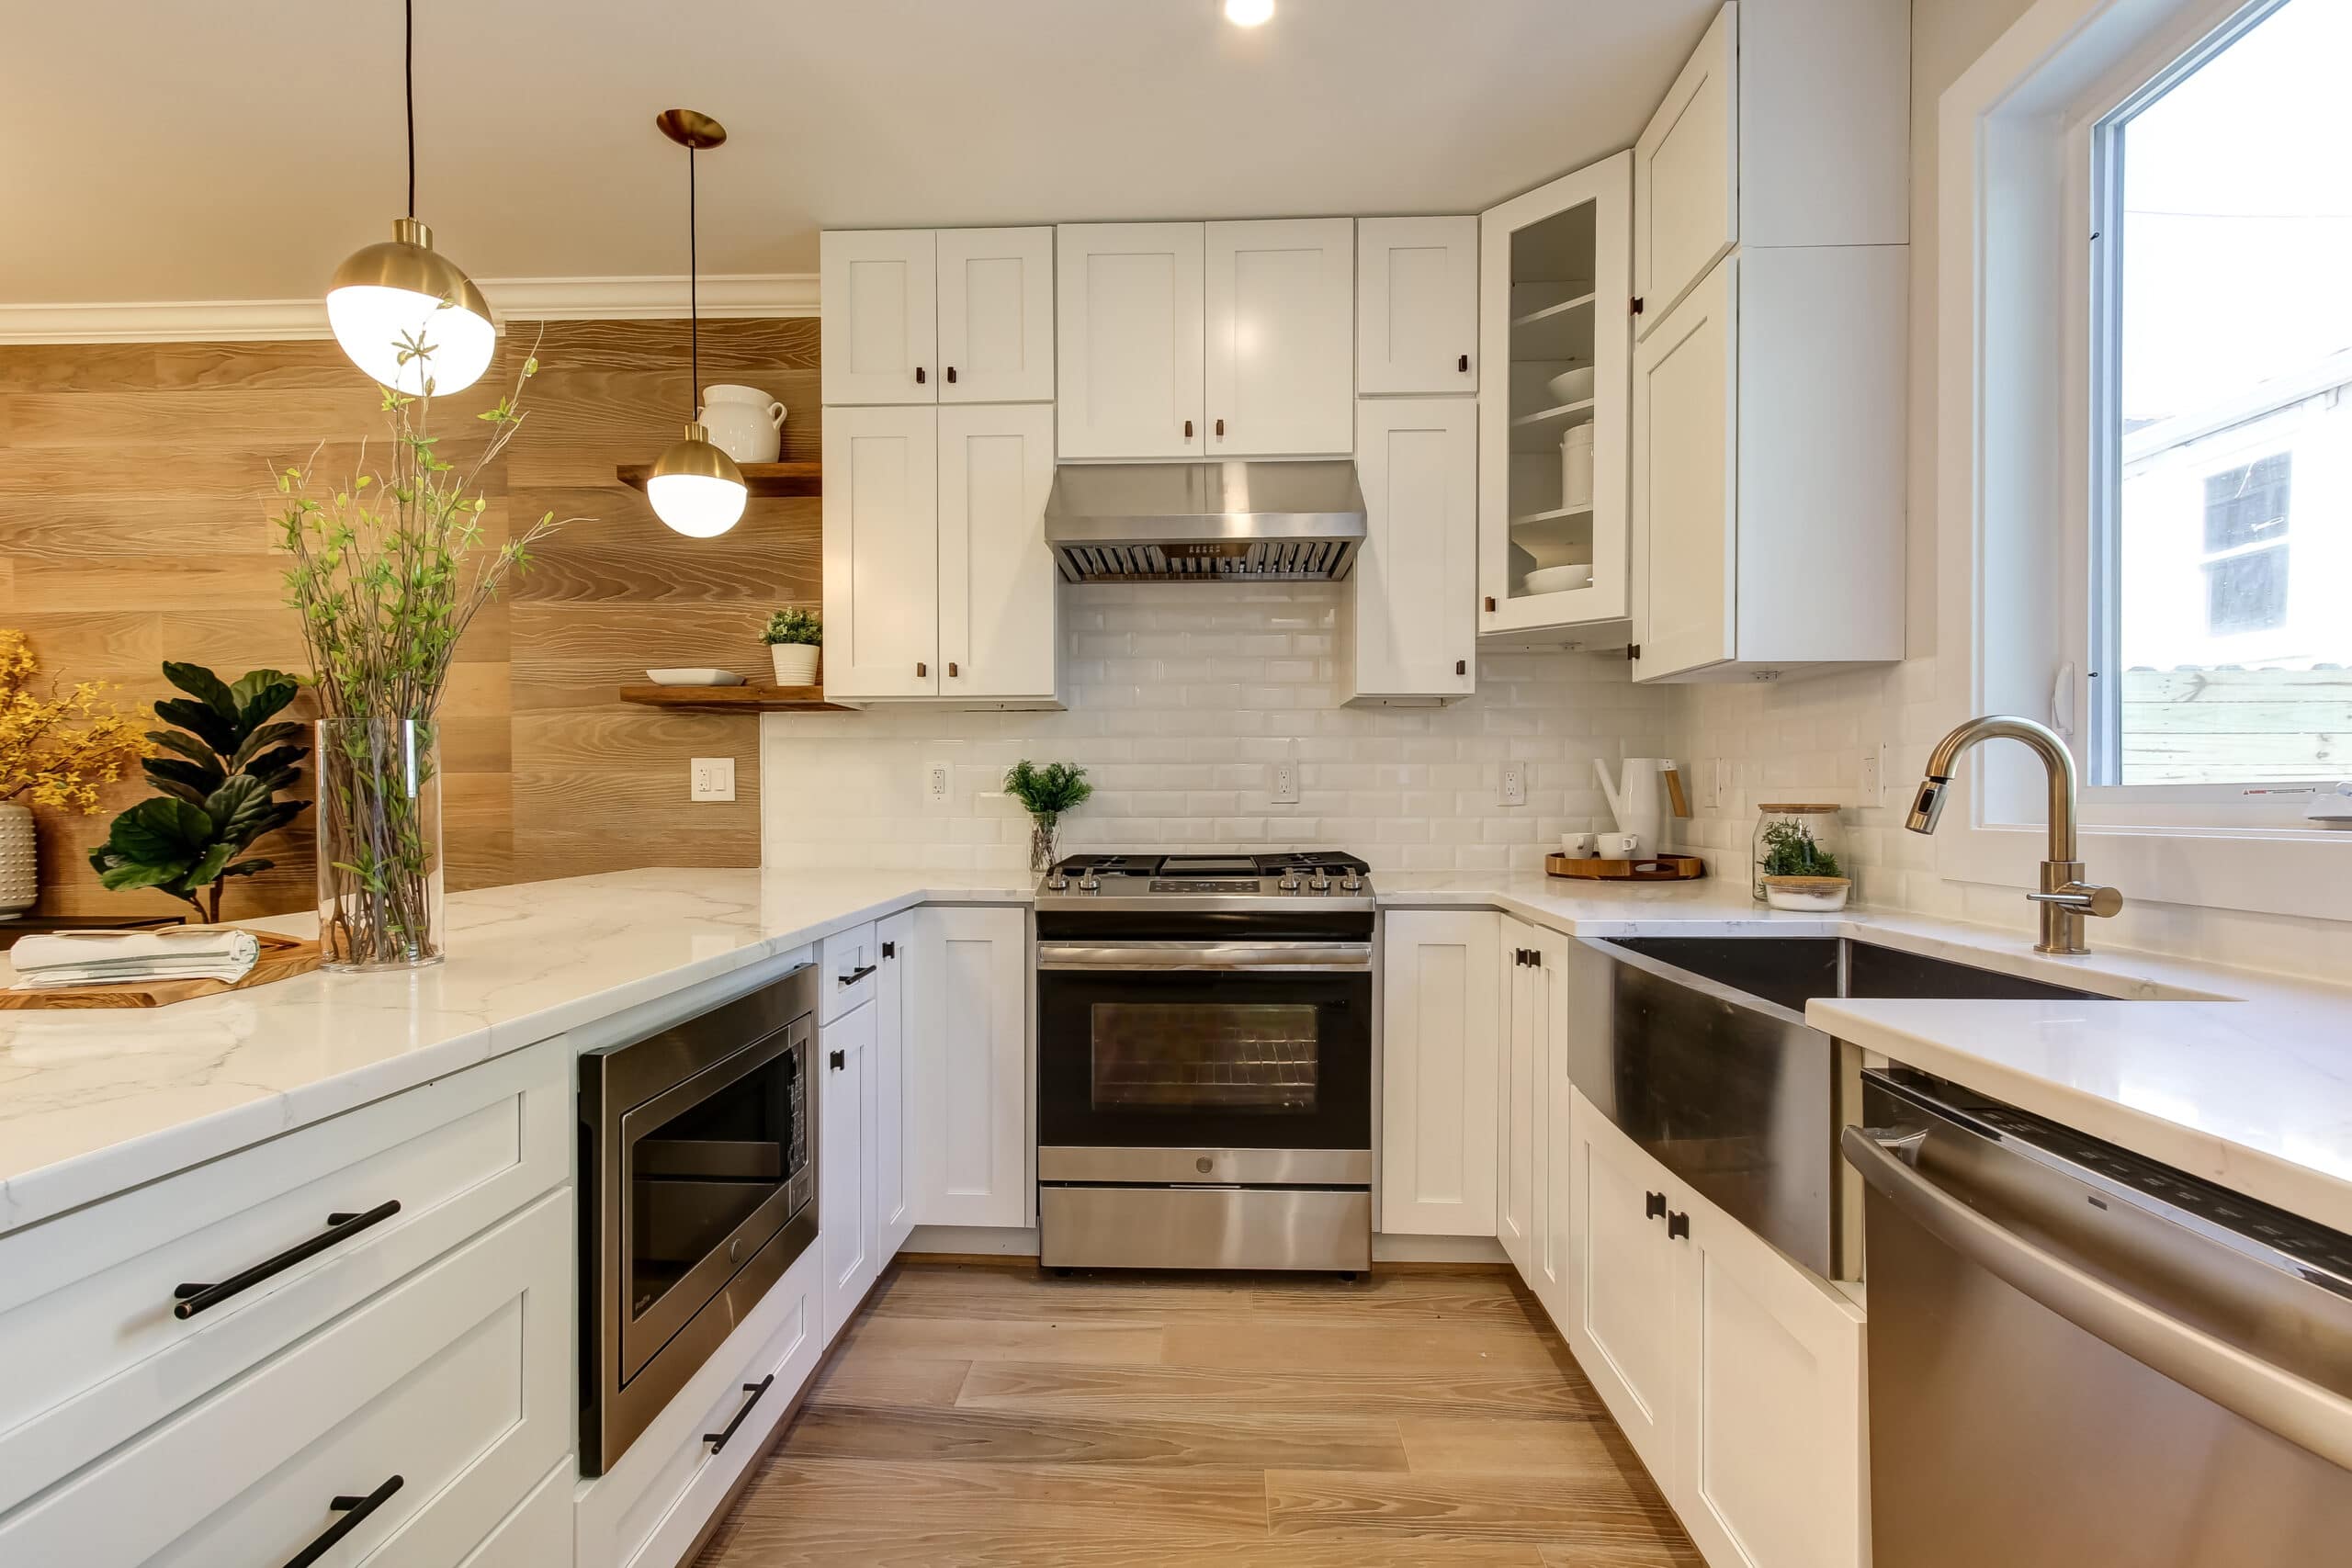 Kitchen Remodeling Process A Step by Step Guide